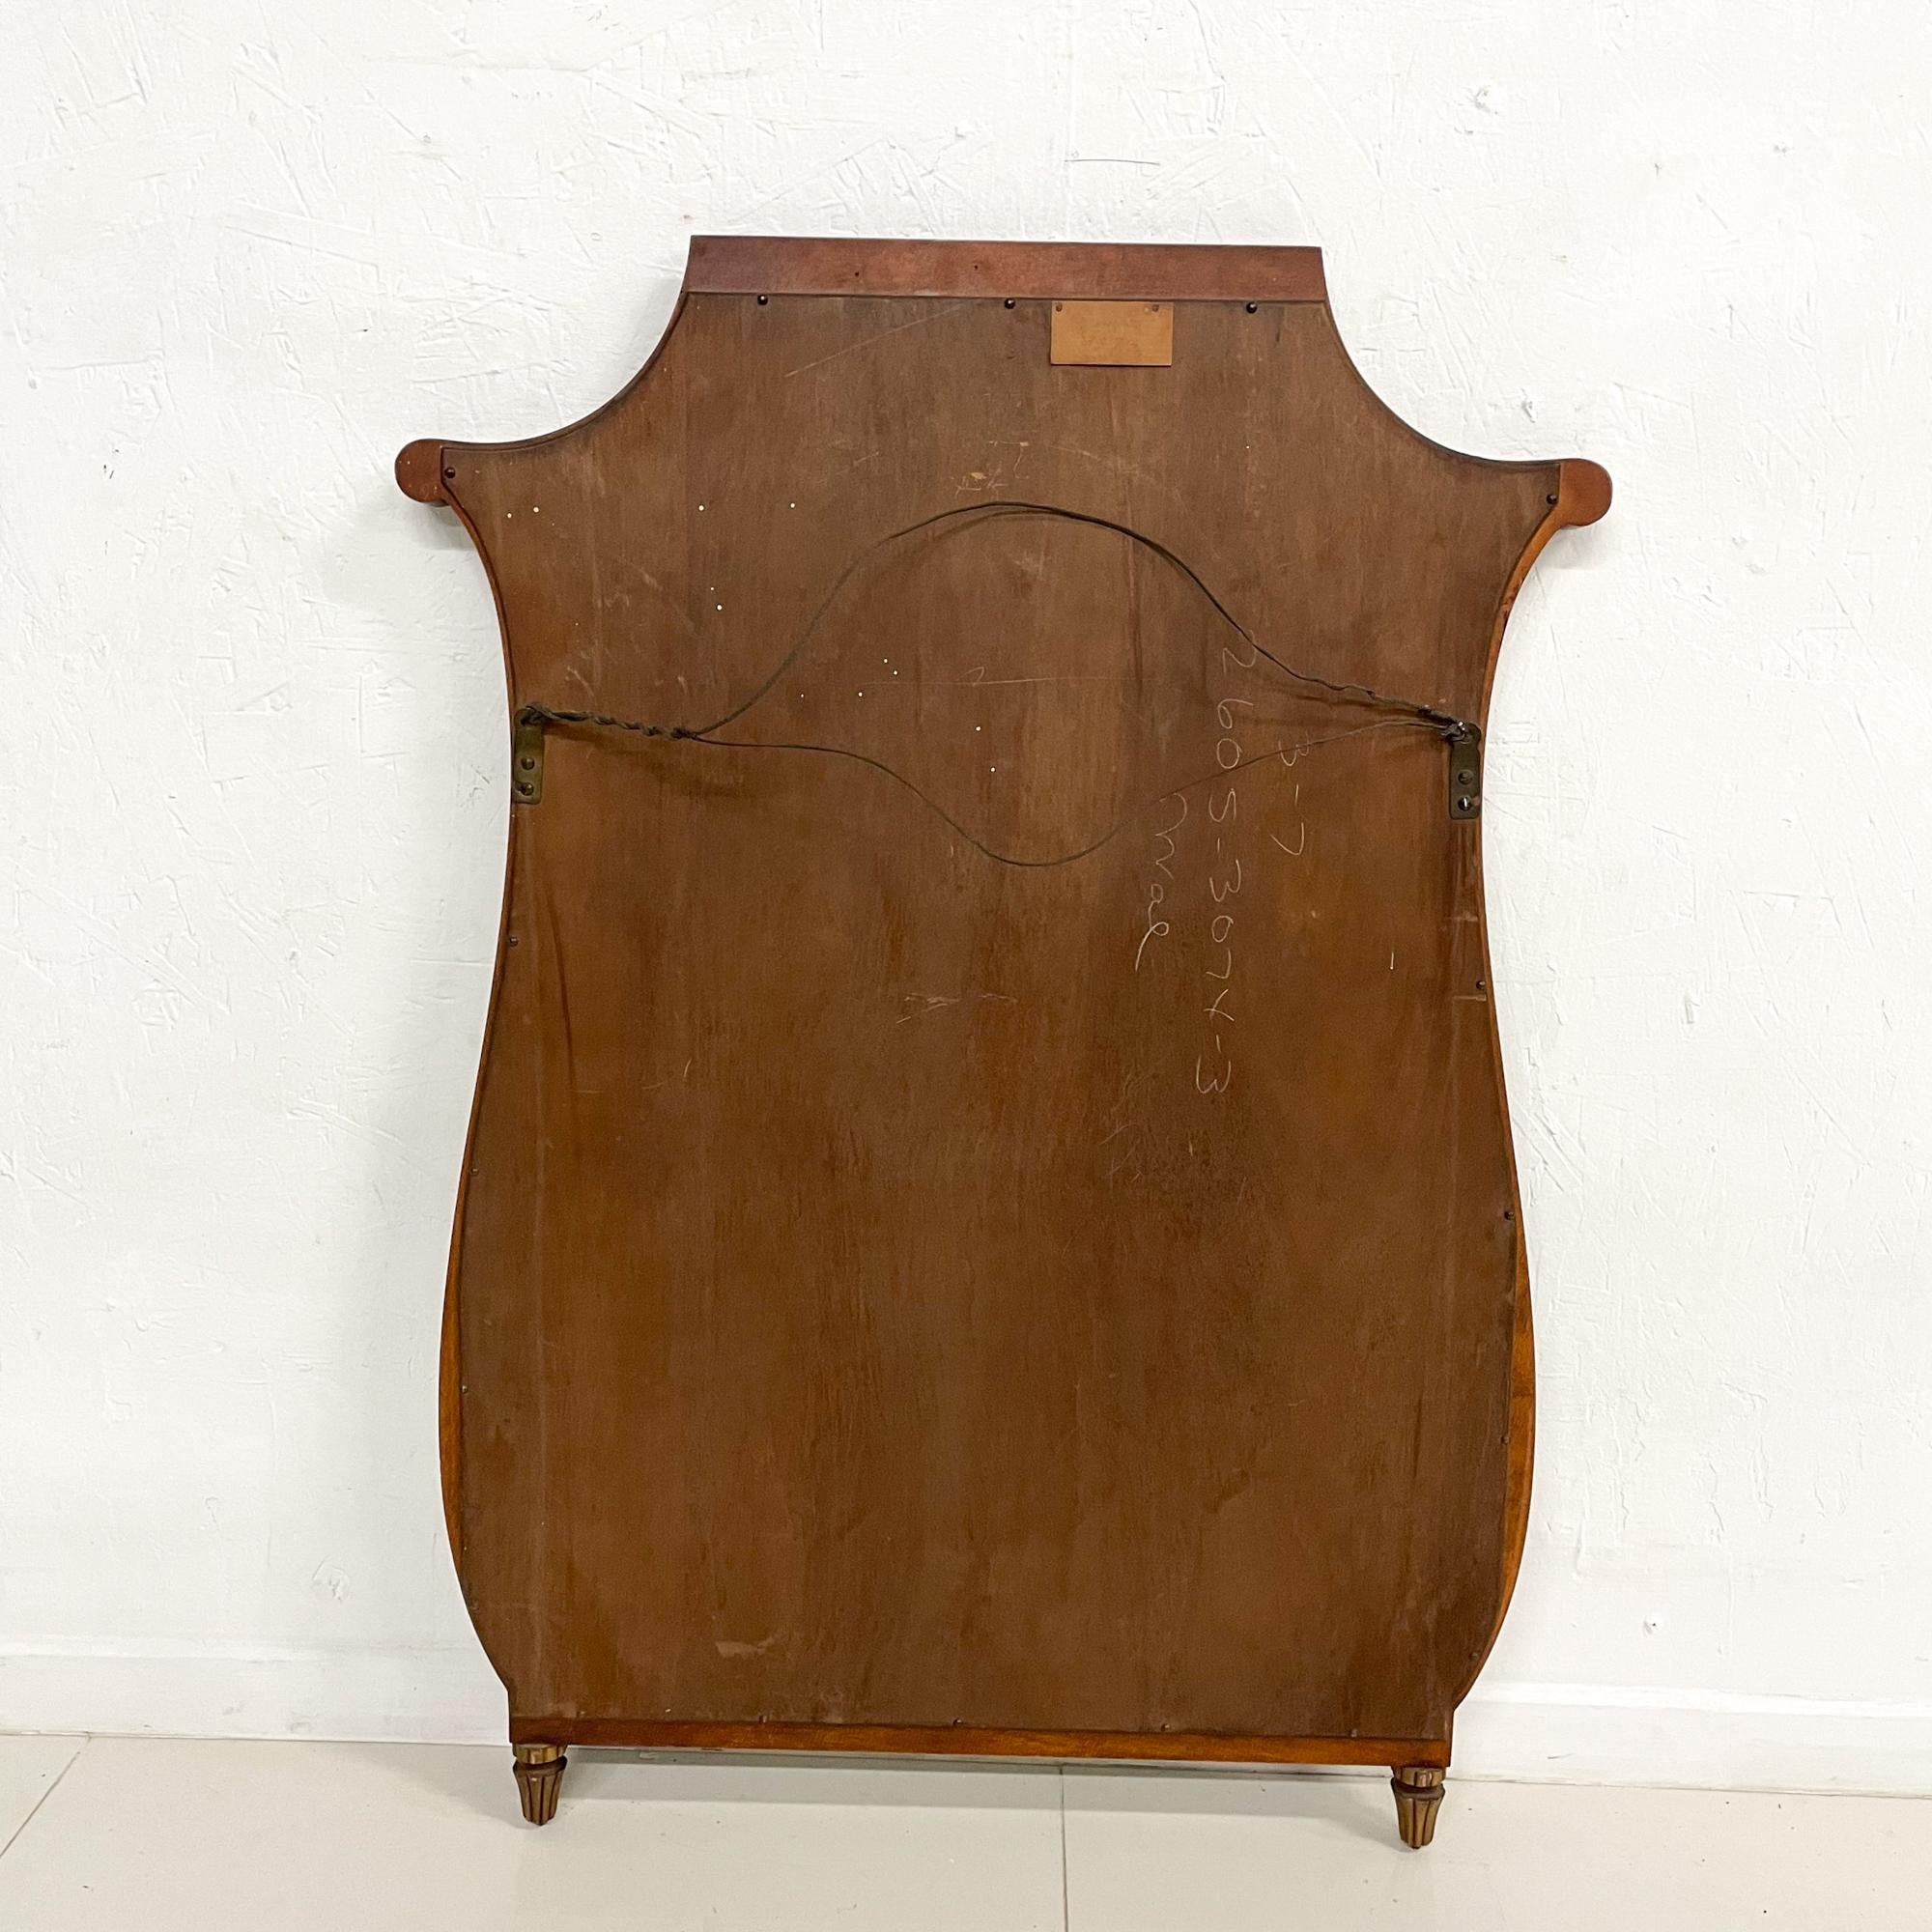 1940s American Neoclassical Wall Mirror by Landstrom Furniture 6